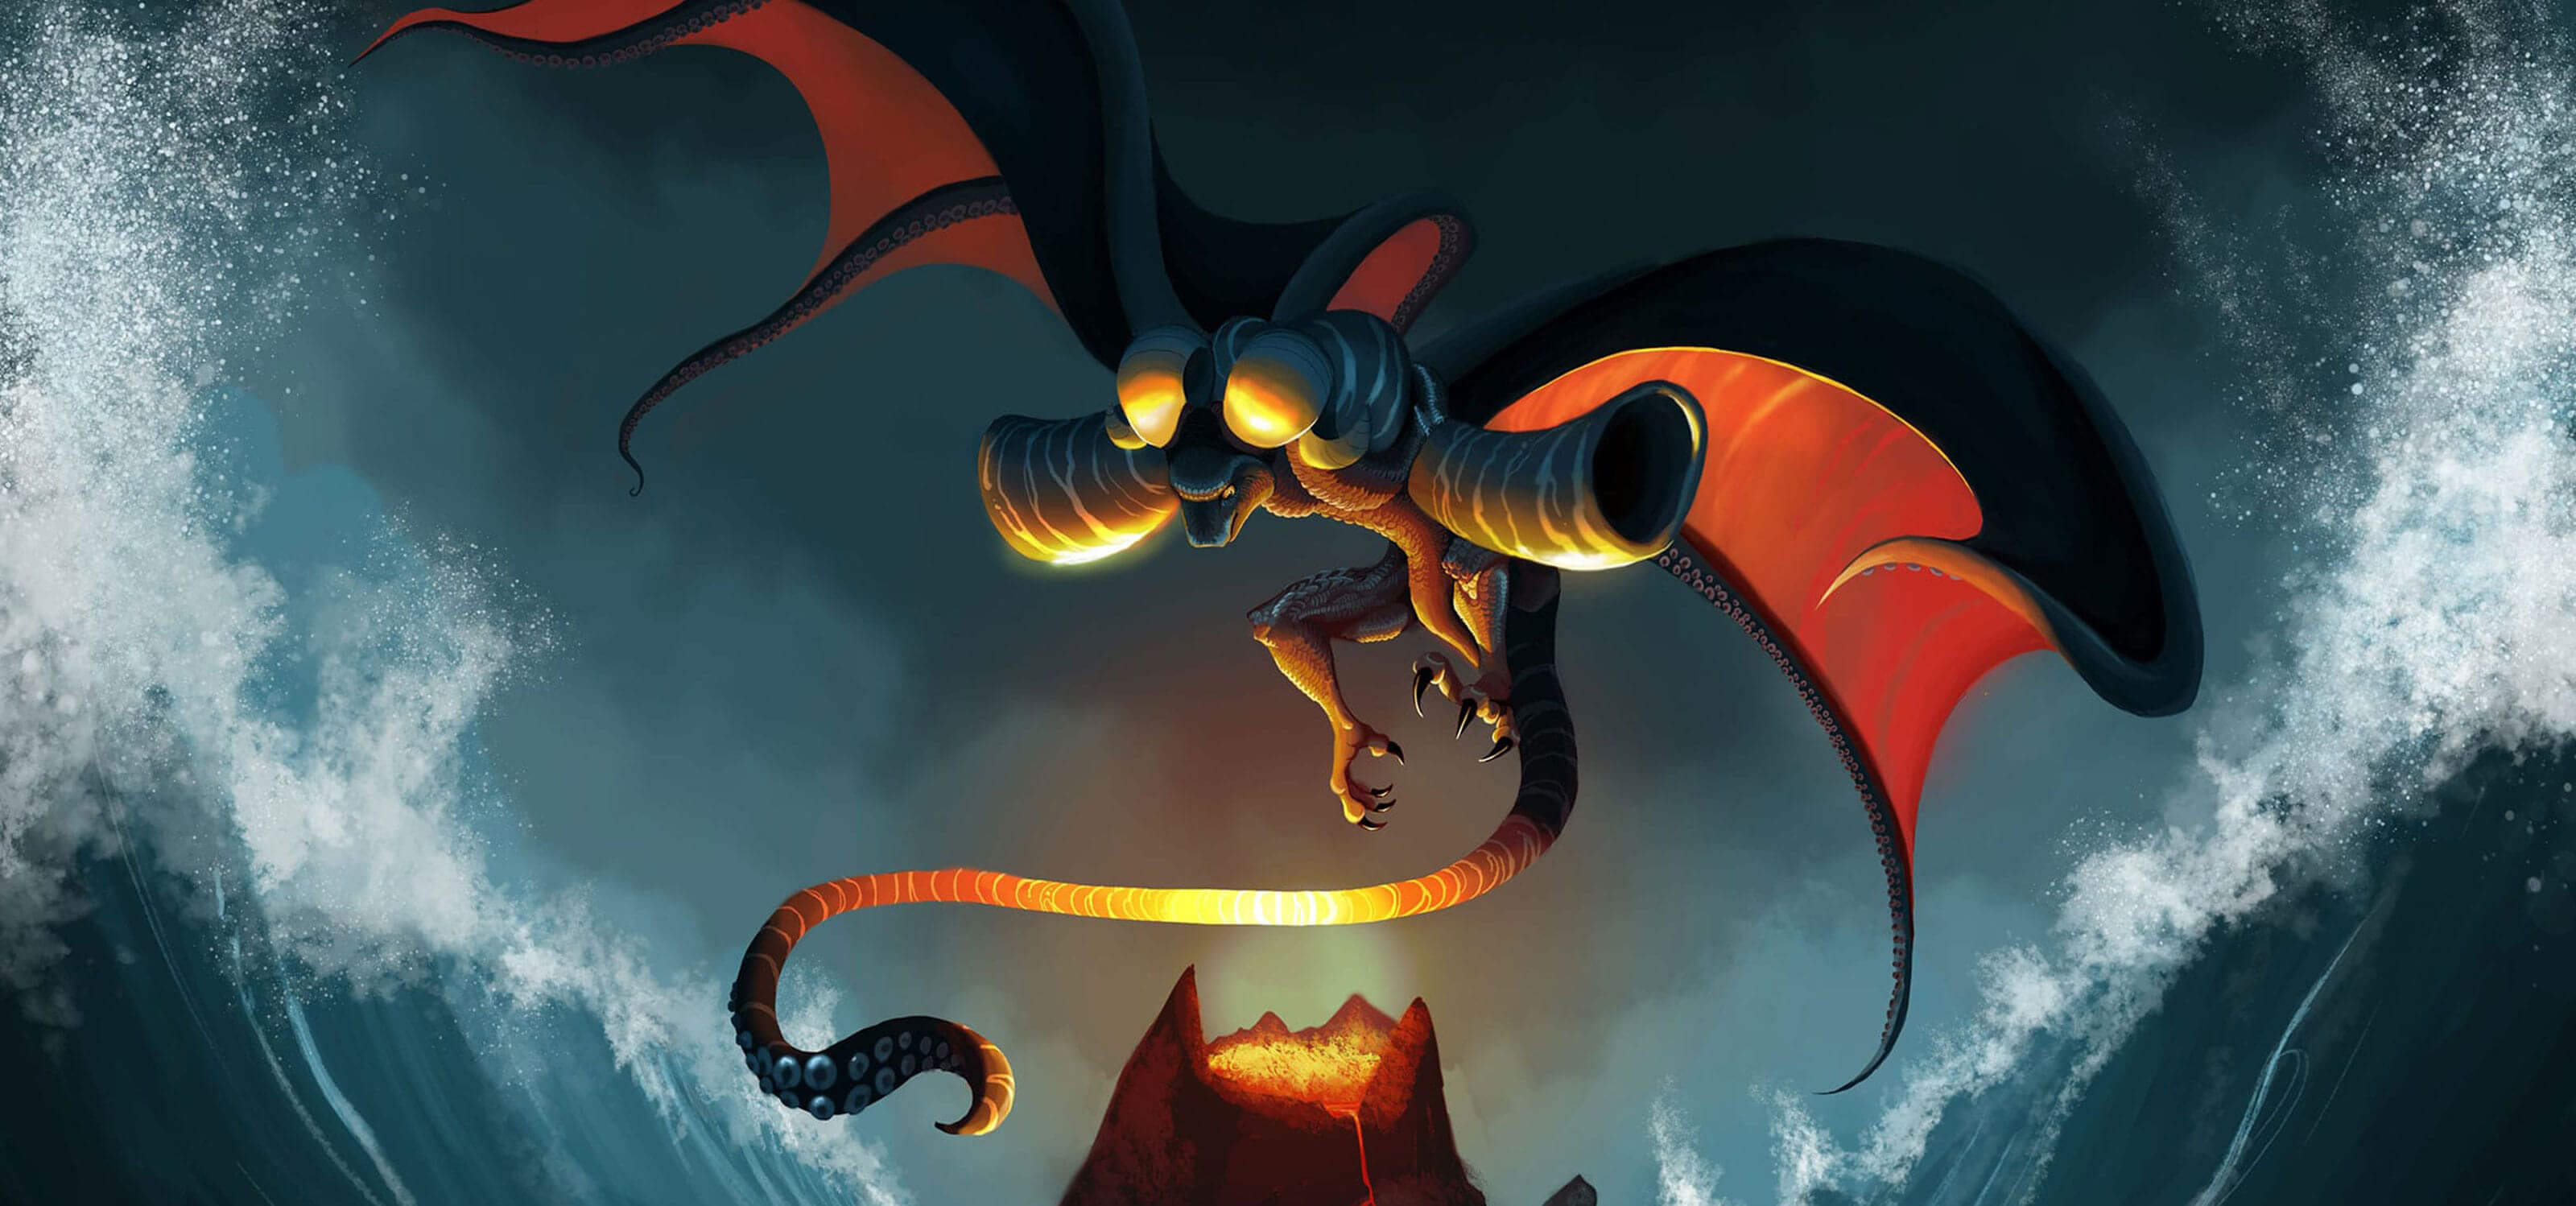 A creature with dragon and octopus characteristics hovers over a volcano with waves crashing on either side